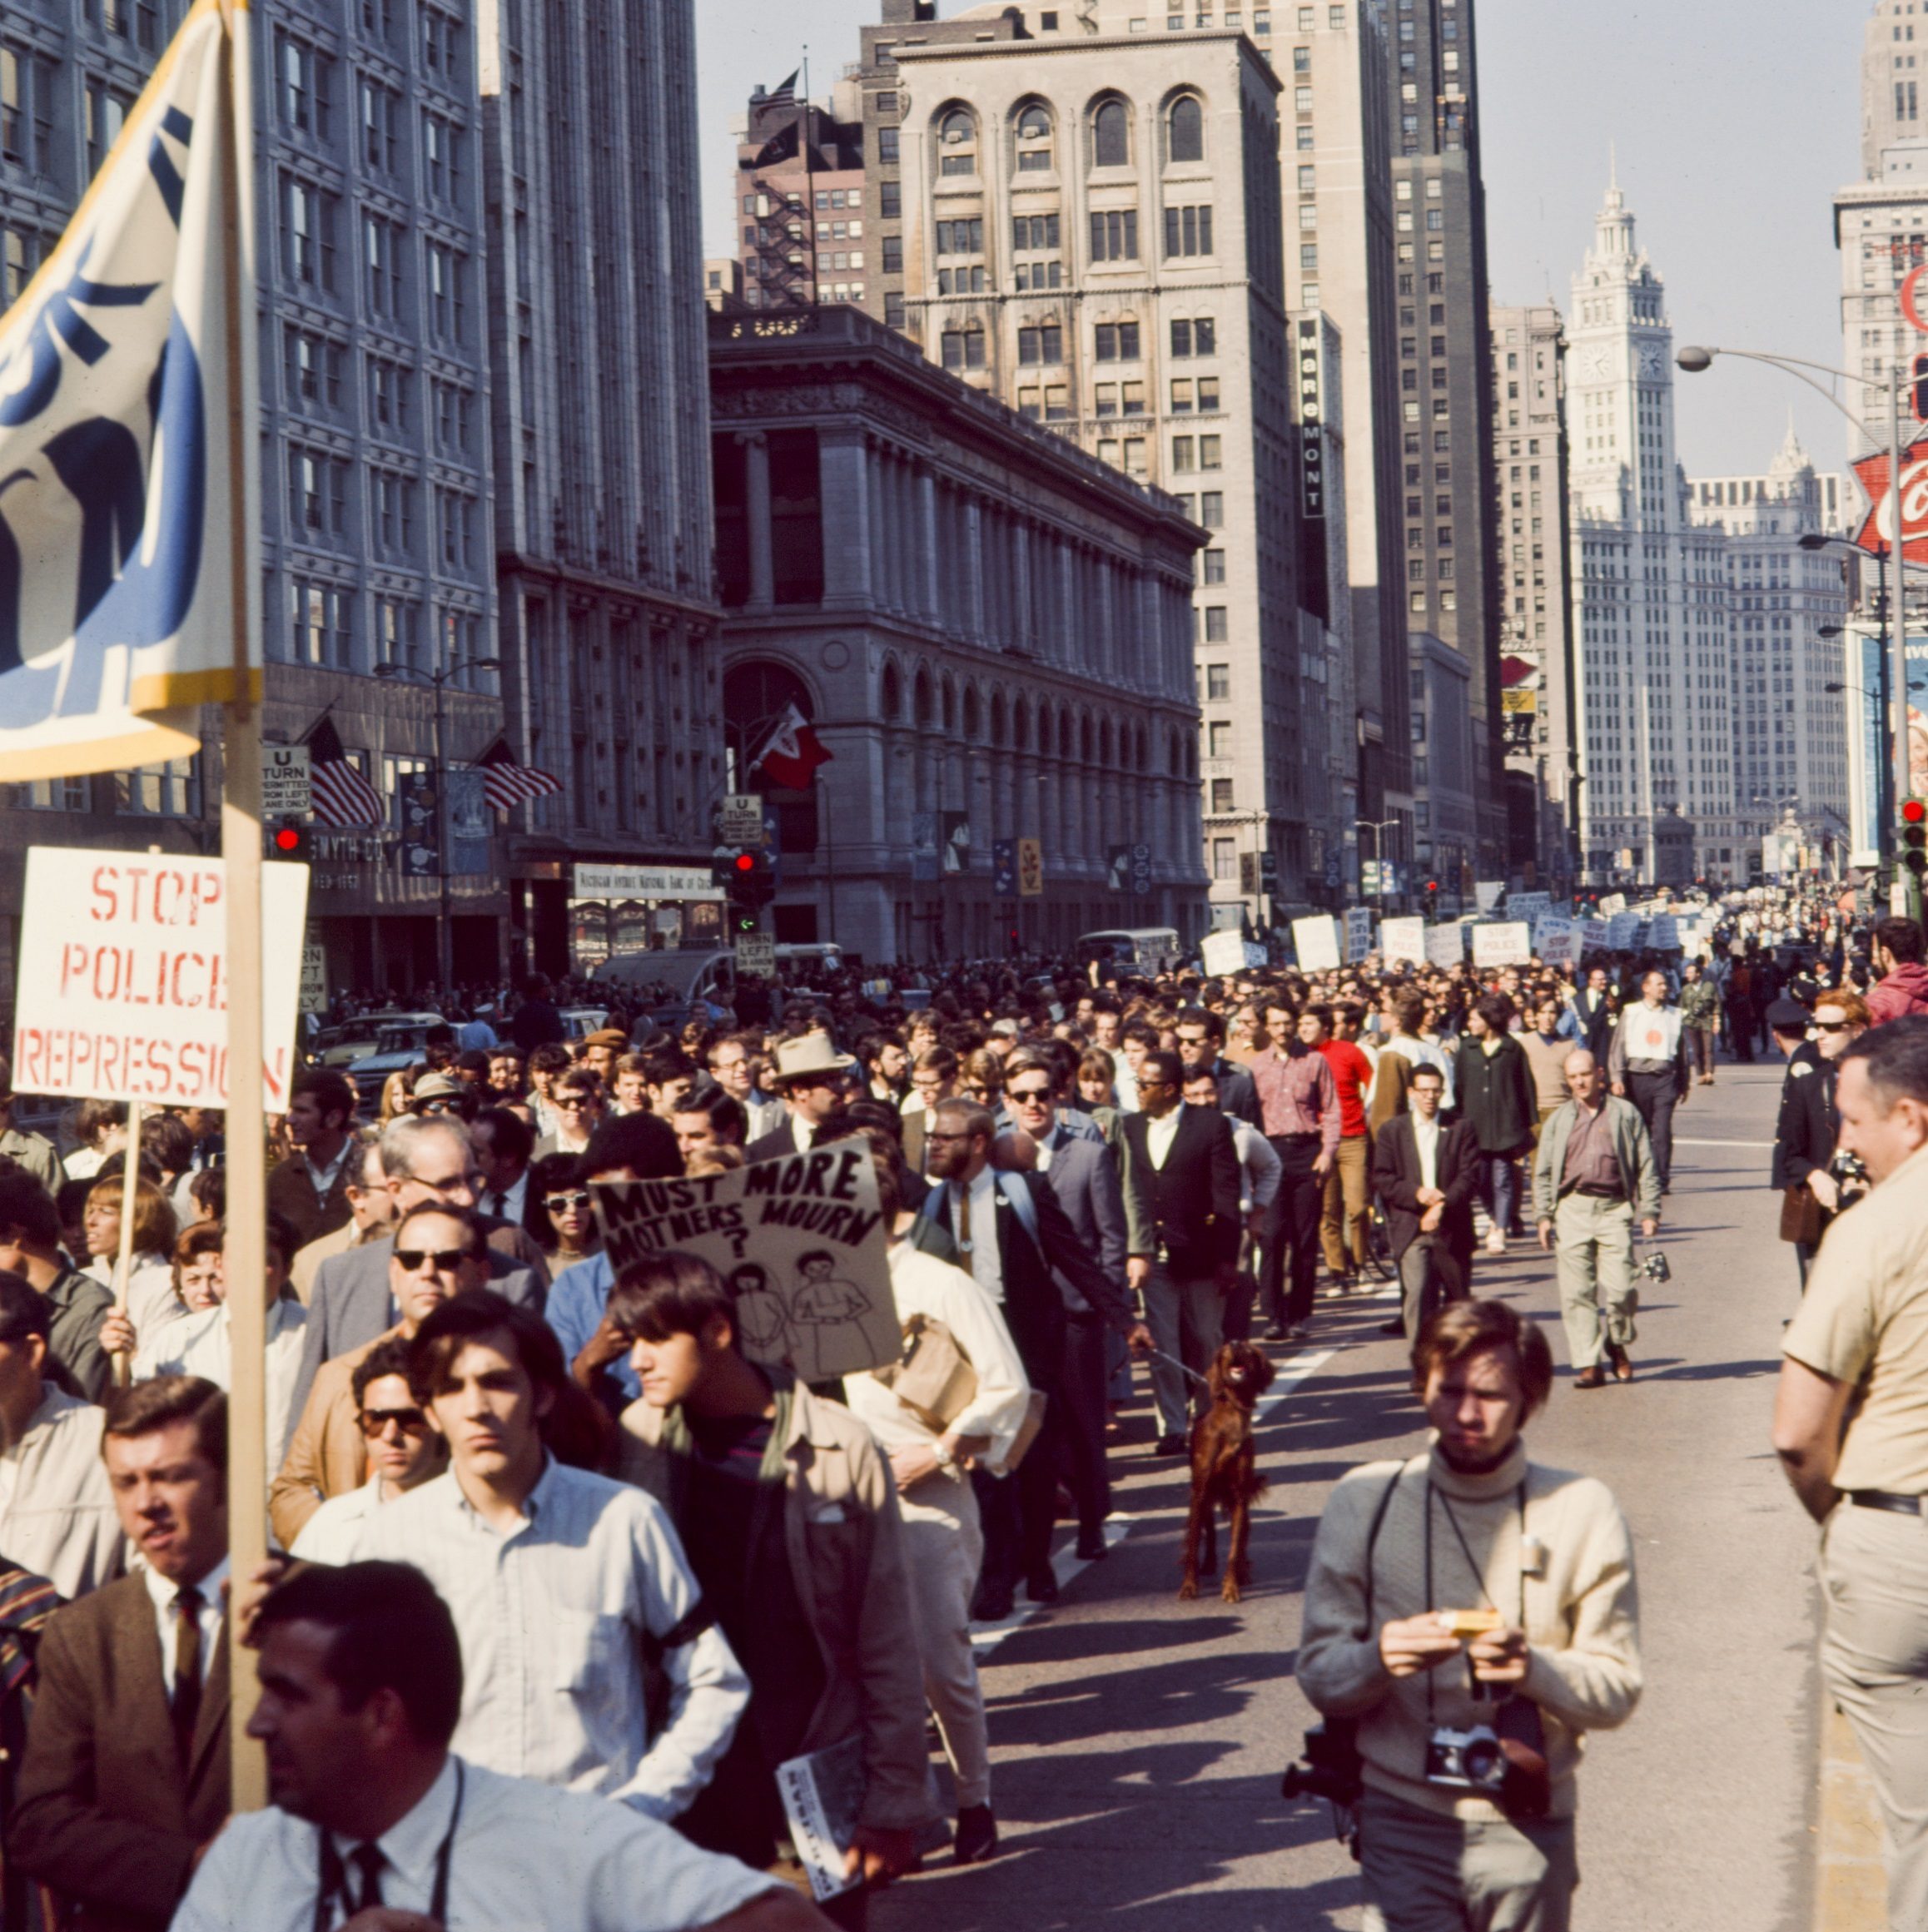 View of protesters at the 1968 Democratic National Convention, marching down Michigan Avenue.